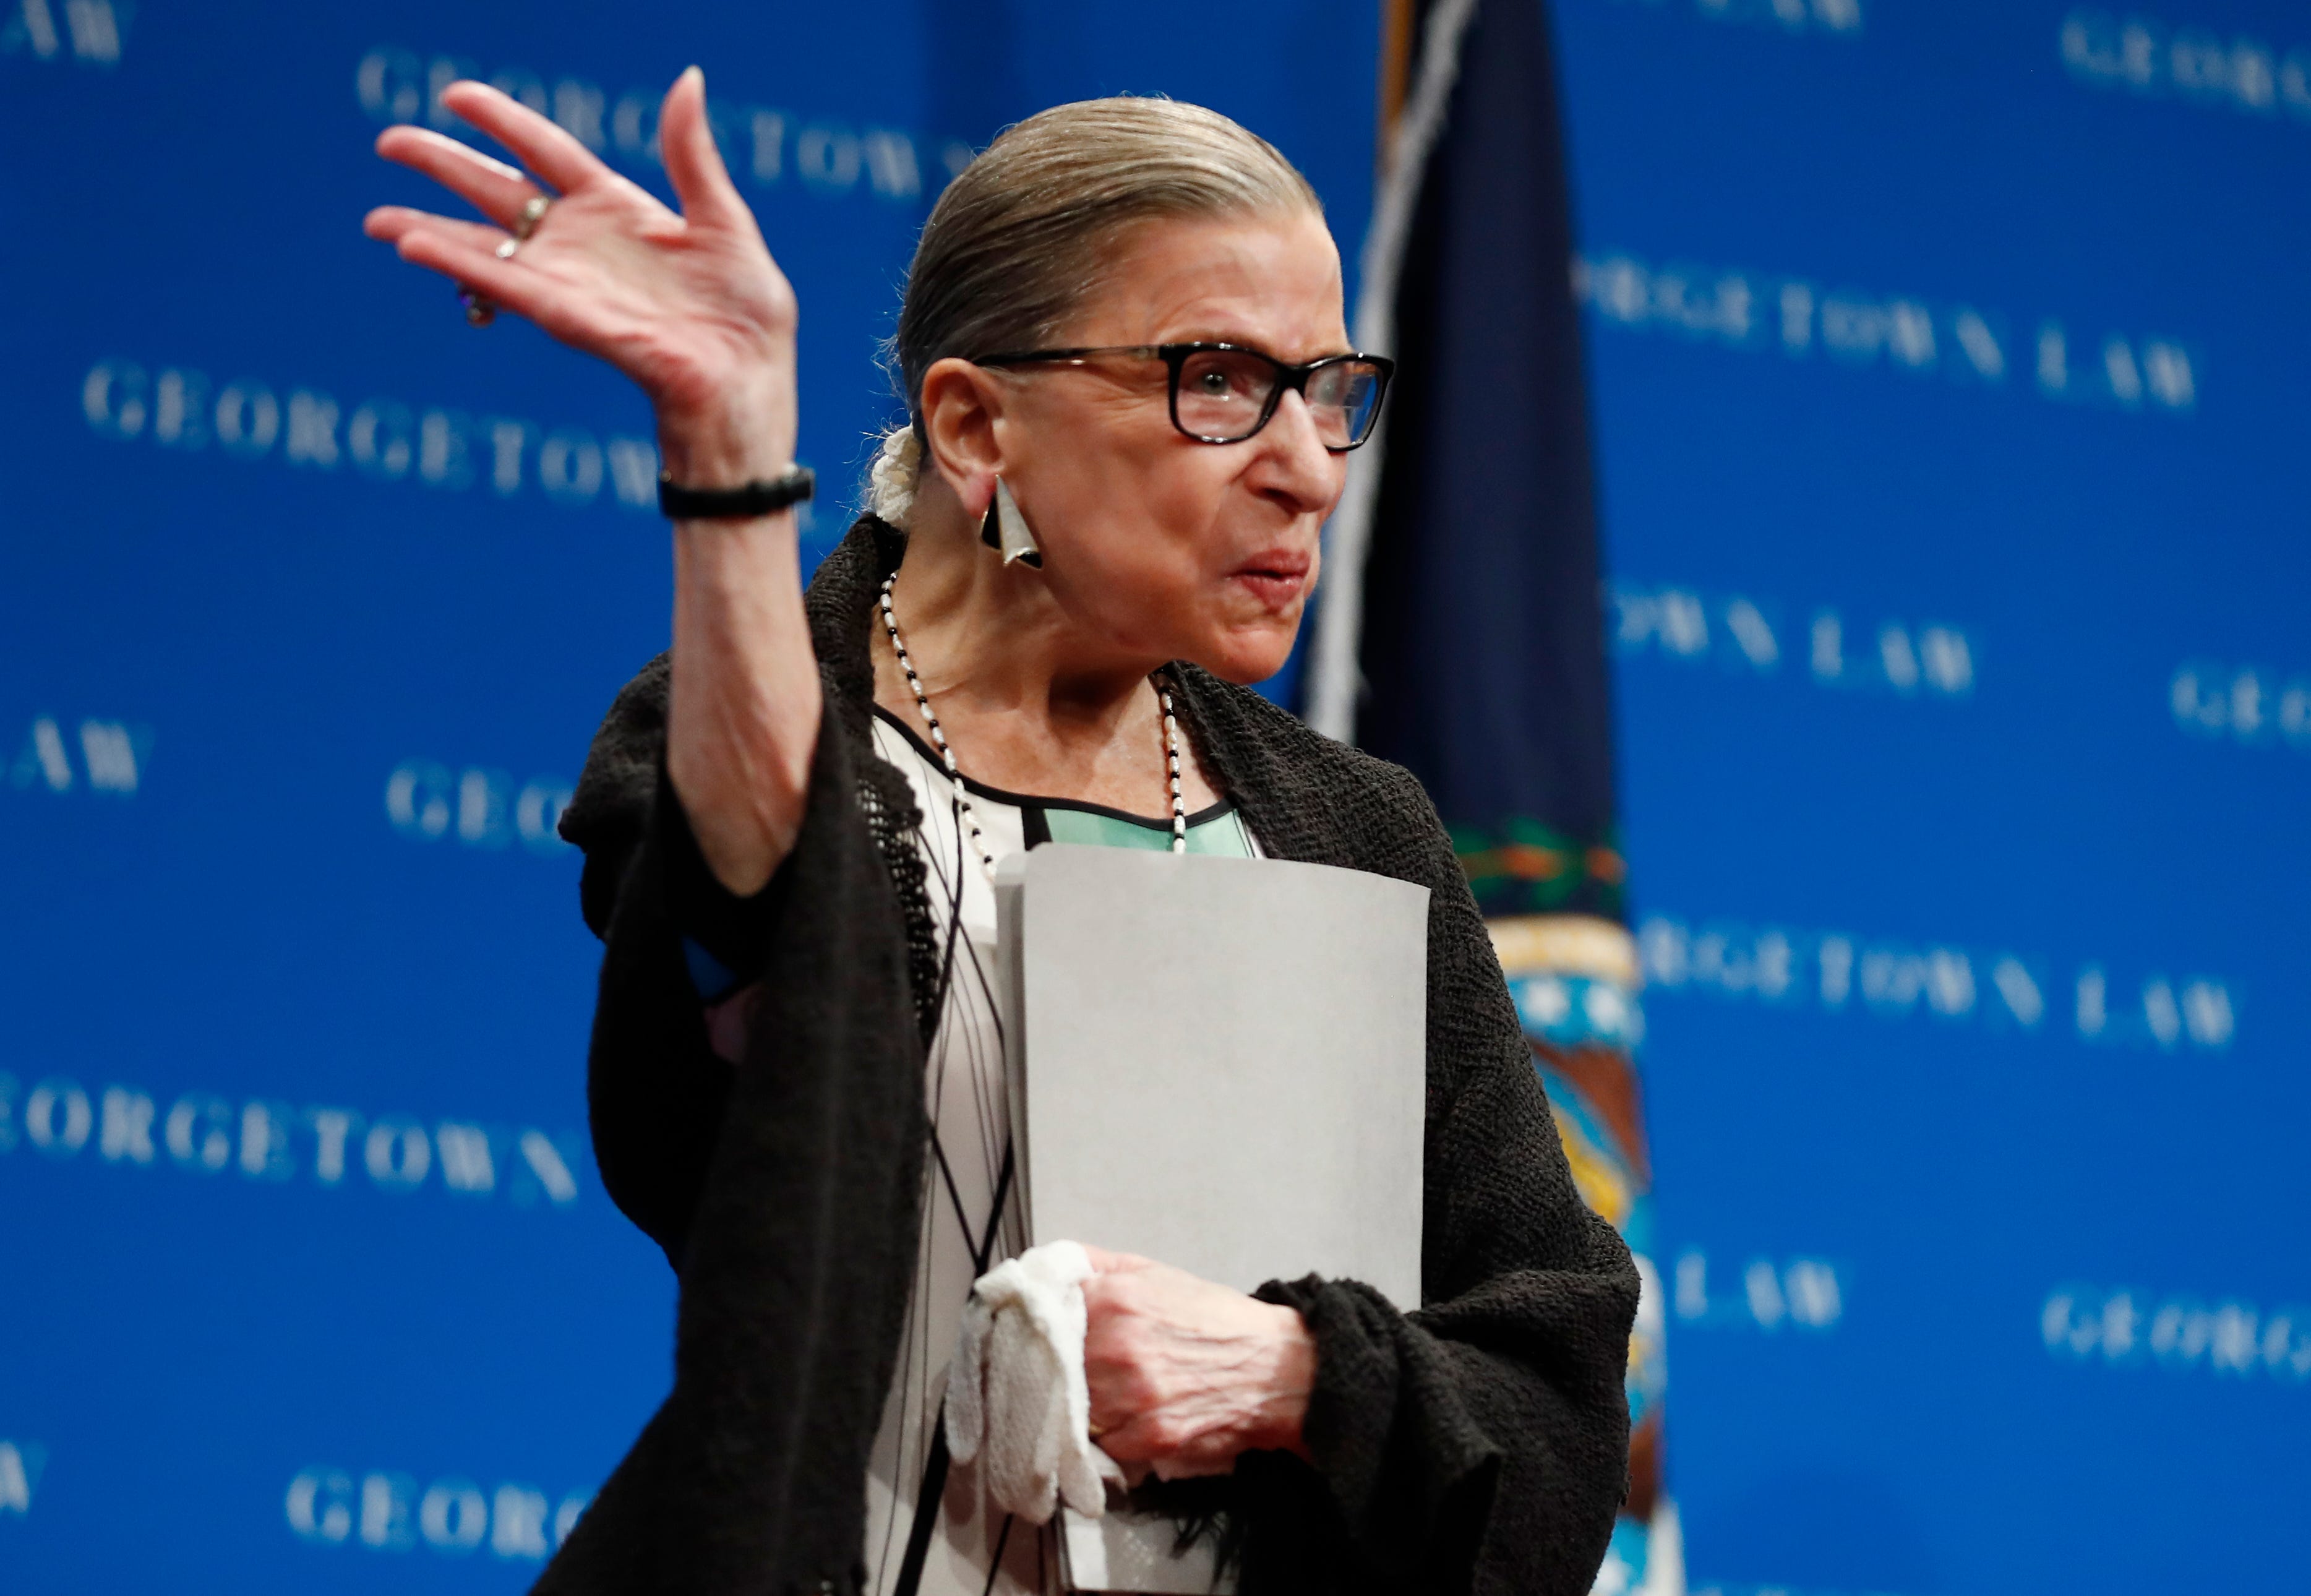 Squat, lift, kick, curl: Justice Ginsburg&apos;s workout is tough and it left me exhausted